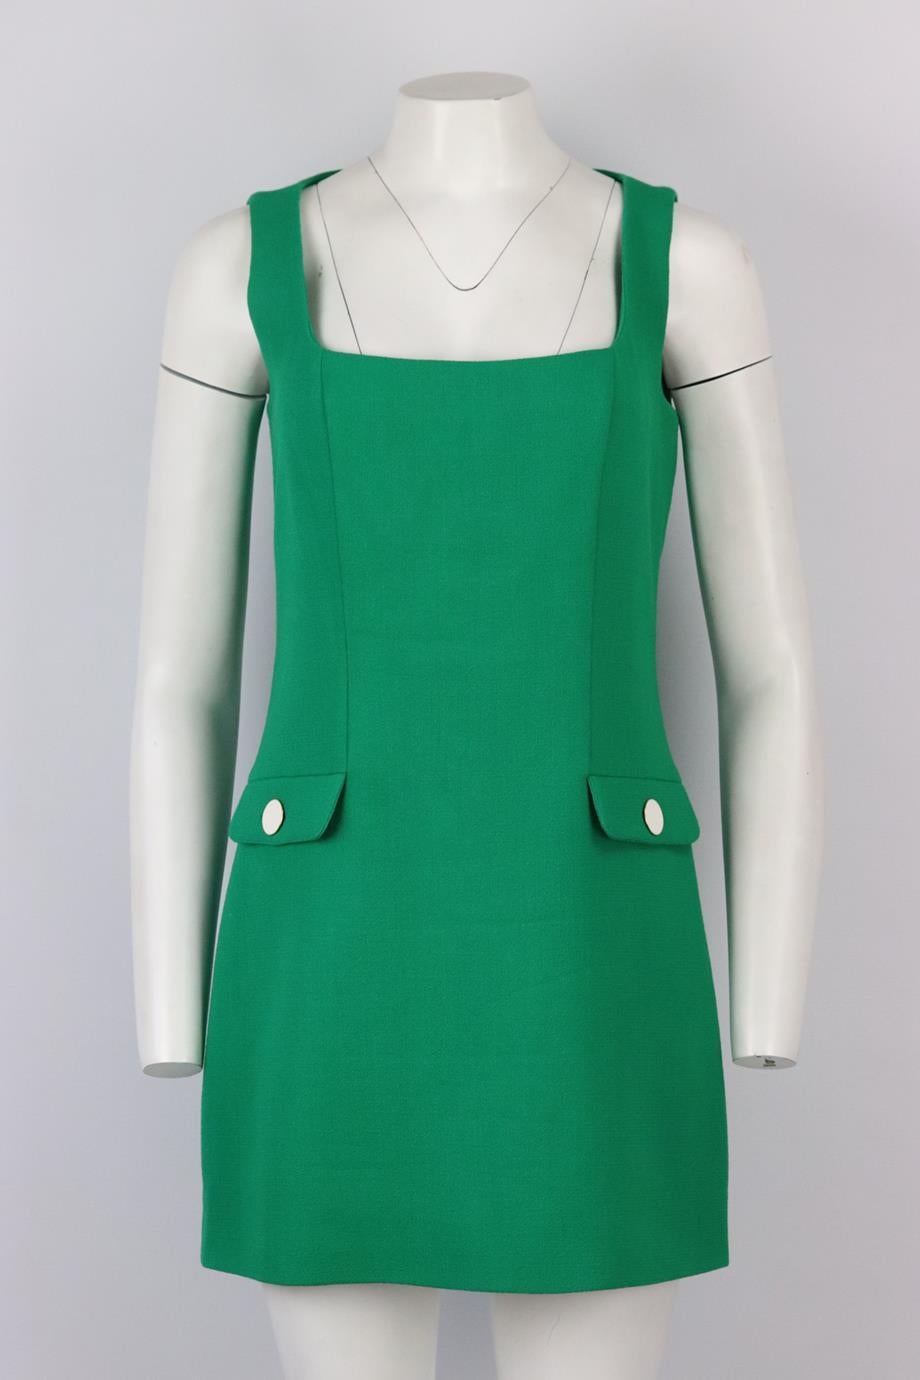 Rowen Rose wool crepe mini dress. Green. Sleeveless, square-neck. Zip fastening at back. 100% Wool; lining: 100% viscose. Size: FR 40 (UK 12, US 8, IT 44). Bust: 37 in. Waist: 31.8 in. Hips: 40.4 in. Length: 32.5 in. Very good condition - No sign of